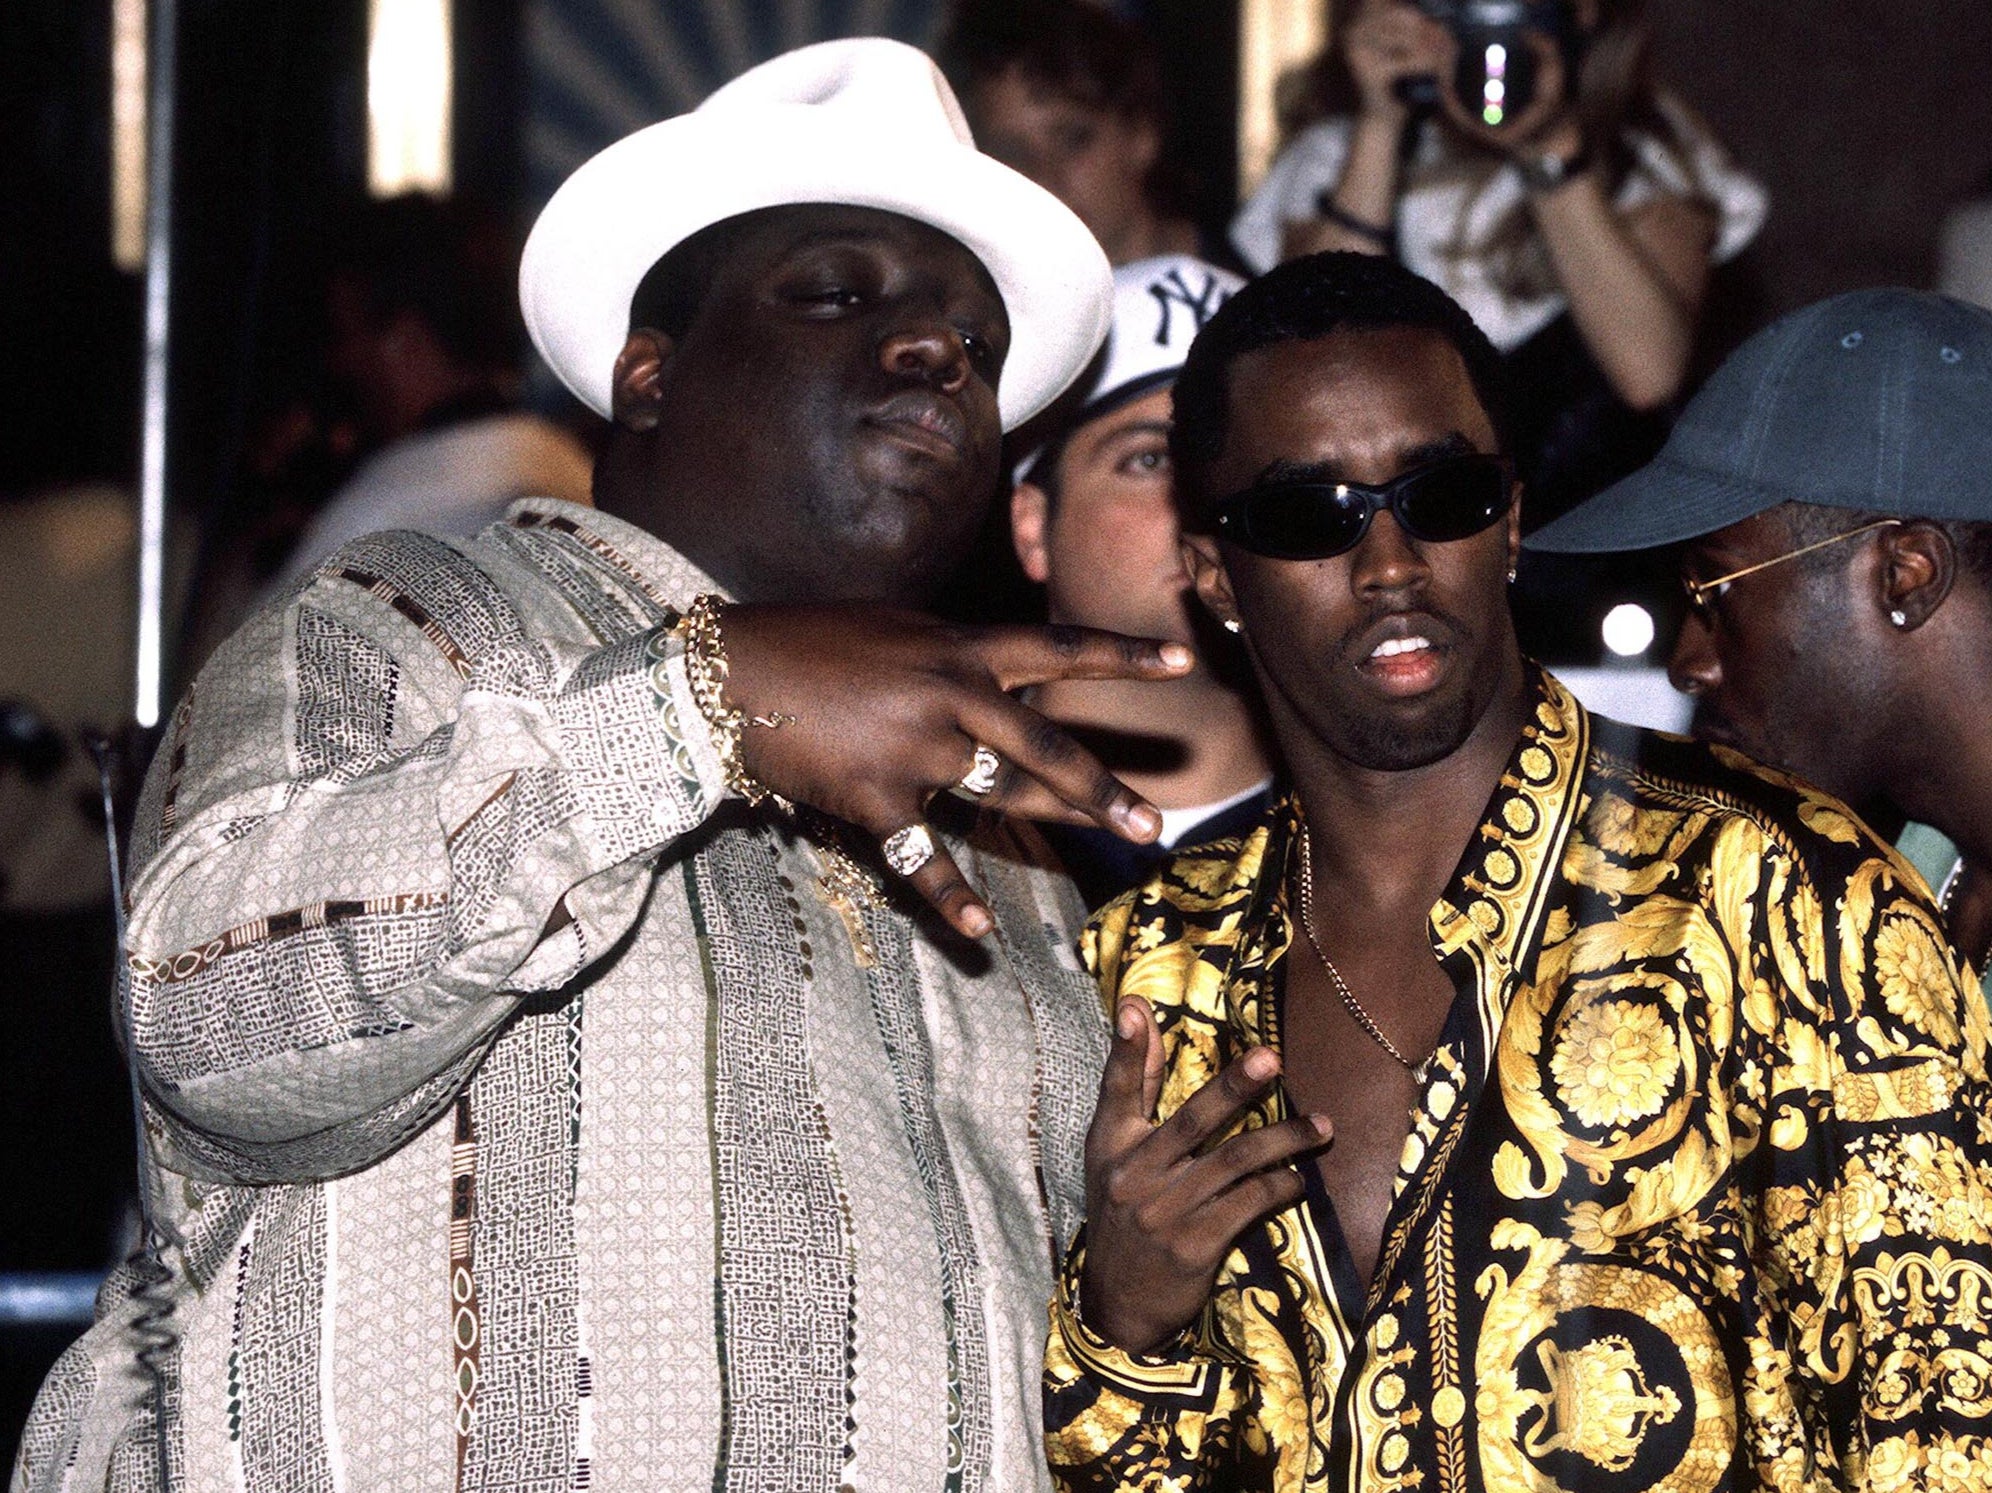 Combs is pictured with the late rapper Notorious B.I.G., who was gunned down in front of him in 1997 in an unsolved killing attributed to the East Coast-West Coast rap feud